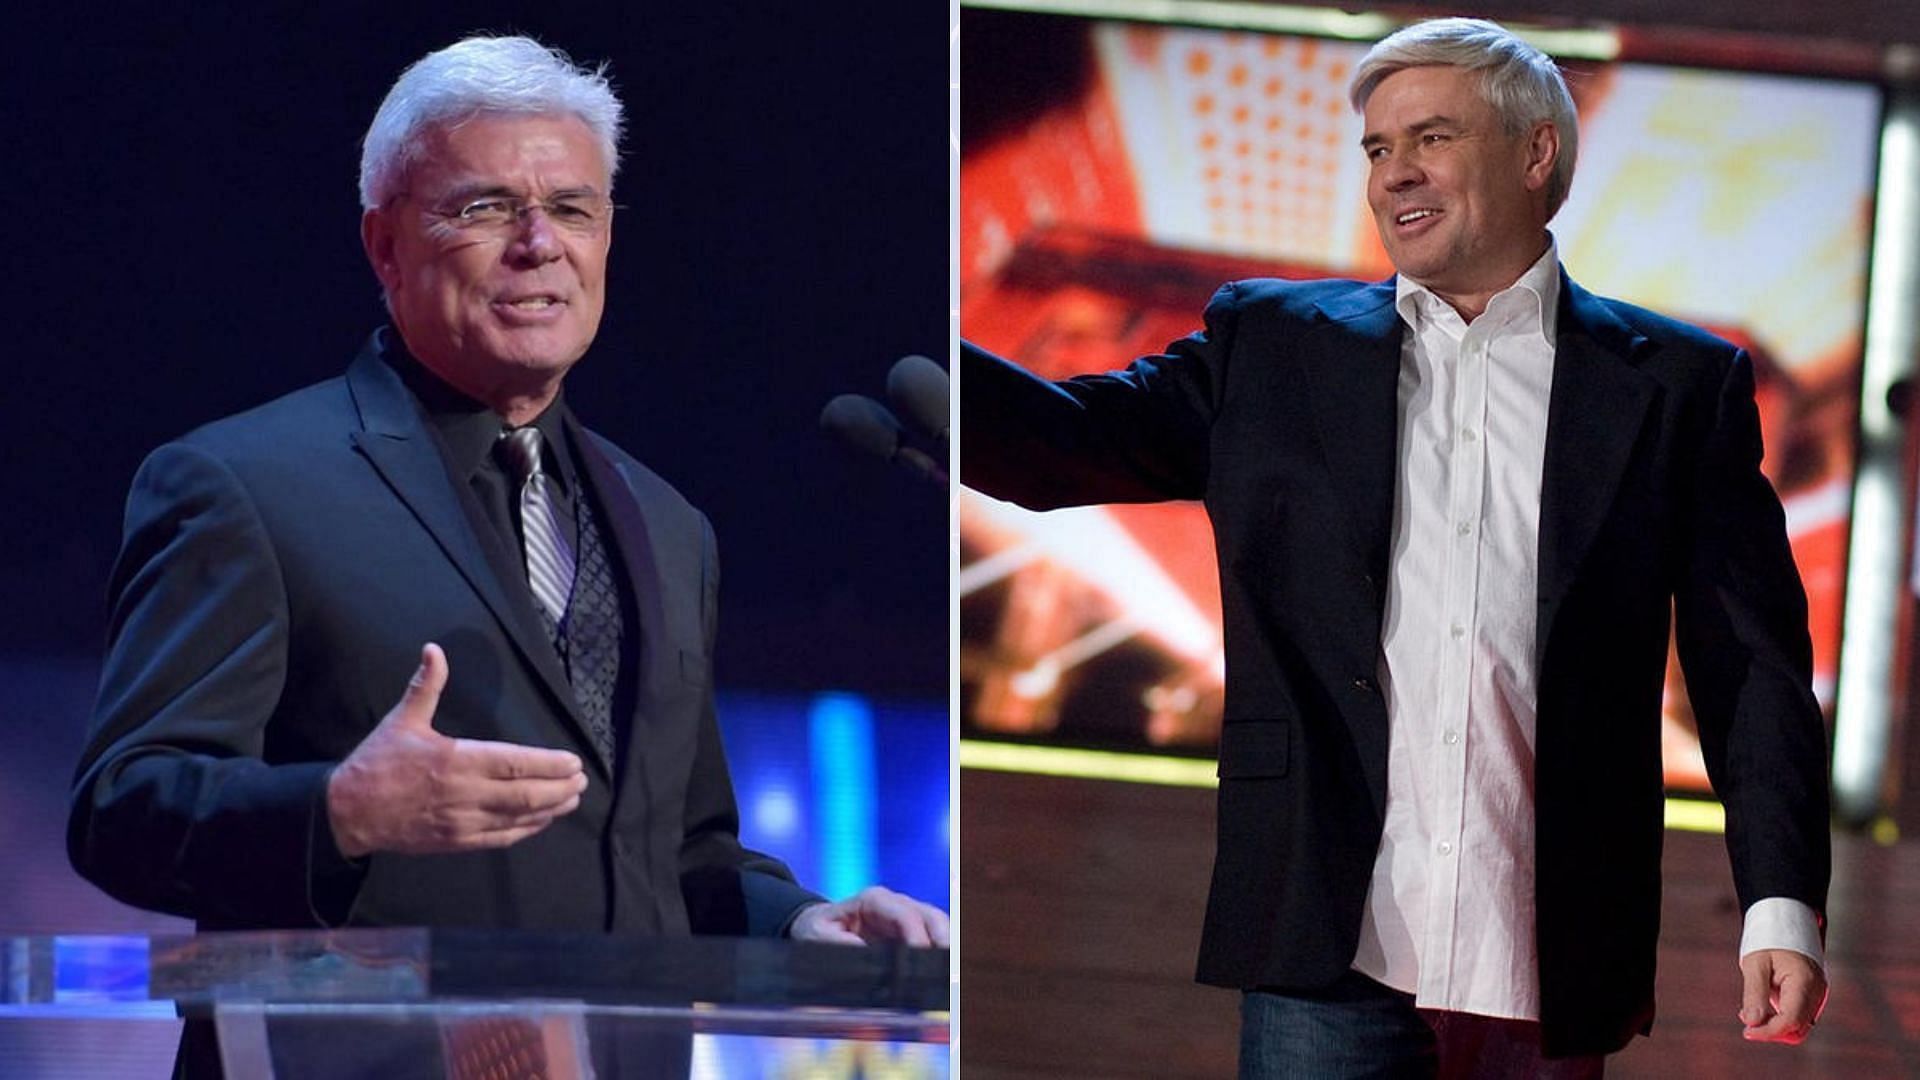 Eric Bischoff is a WWE Hall of Famer